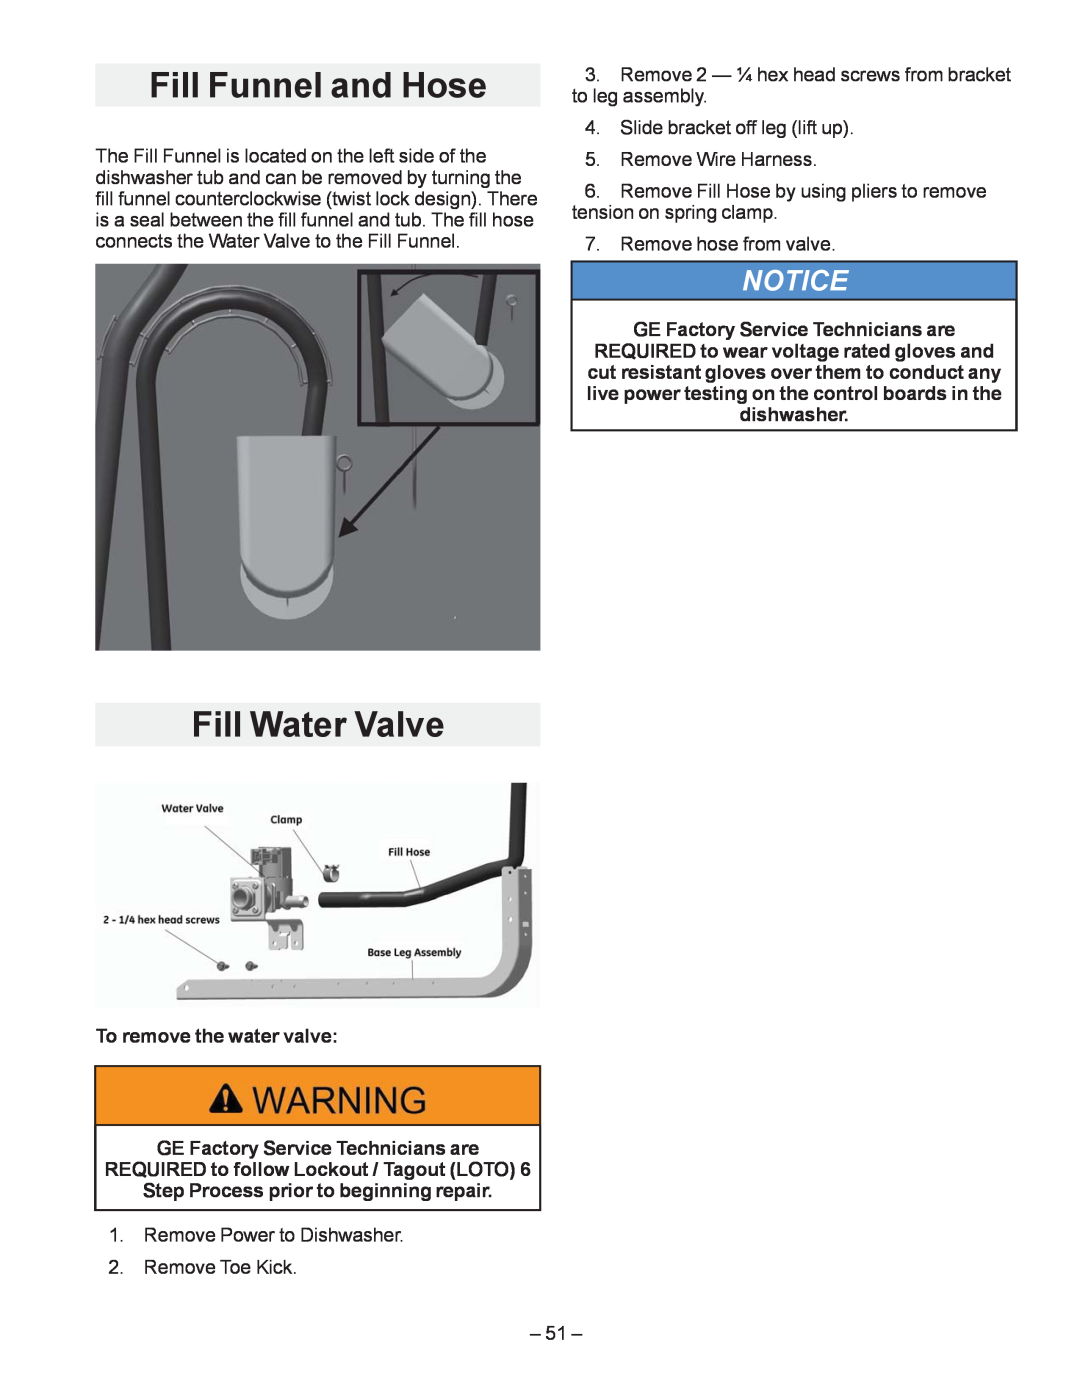 GE GDF510PGD Fill Funnel and Hose, Fill Water Valve,  5HPRYH KRVH IURP YDOYH, To remove the water valve, ±  ±, Notice 